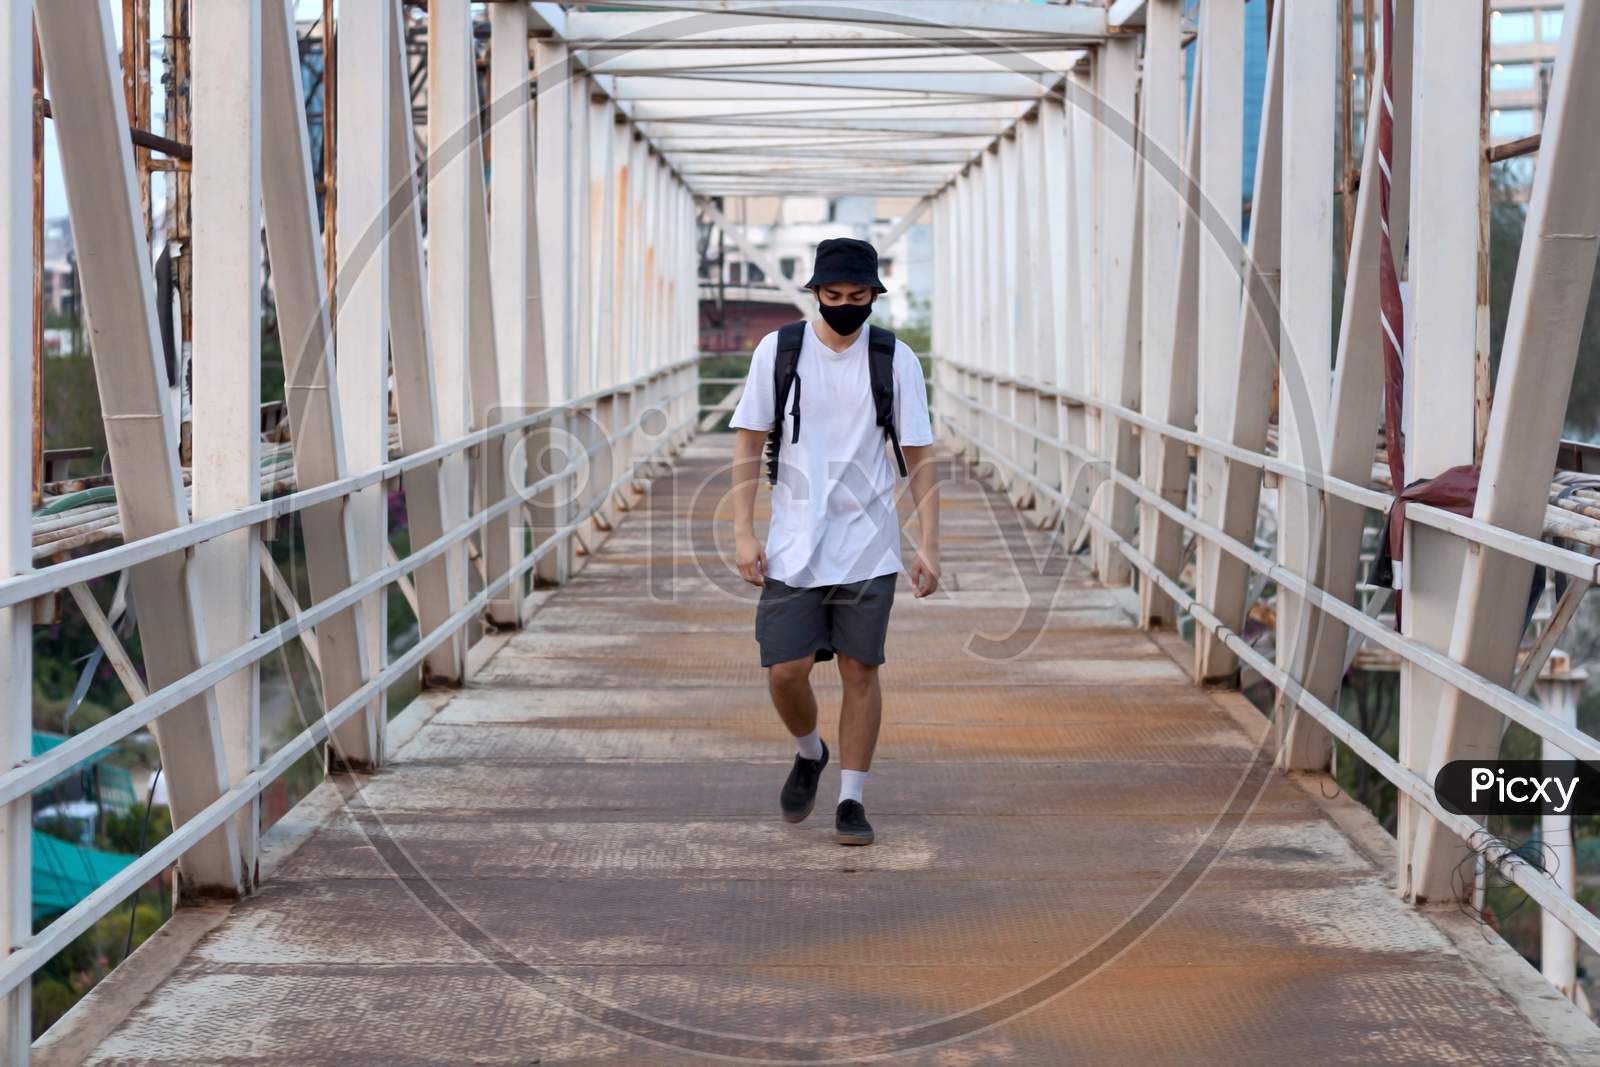 Young Millennial Walking On An Empty Metal Foot Bridge Outdoors While Wearing A Black Protective Face Mask To Prevent Coronavirus Infection In A City. The New Normal.